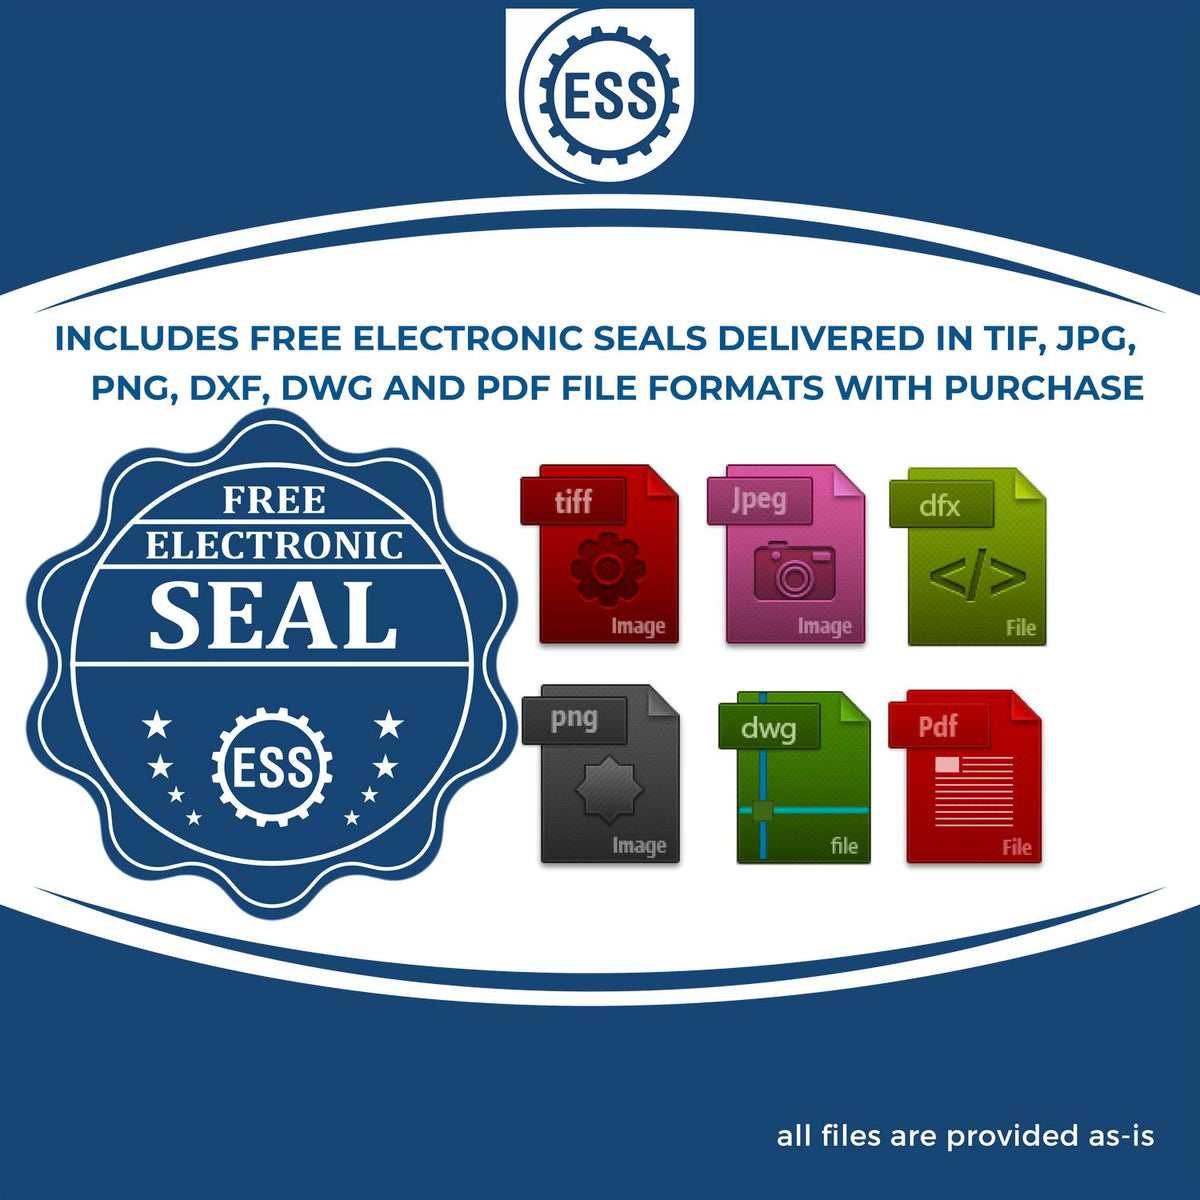 An infographic for the free electronic seal for the New Mexico Professional Geologist Seal Stamp illustrating the different file type icons such as DXF, DWG, TIF, JPG and PNG.